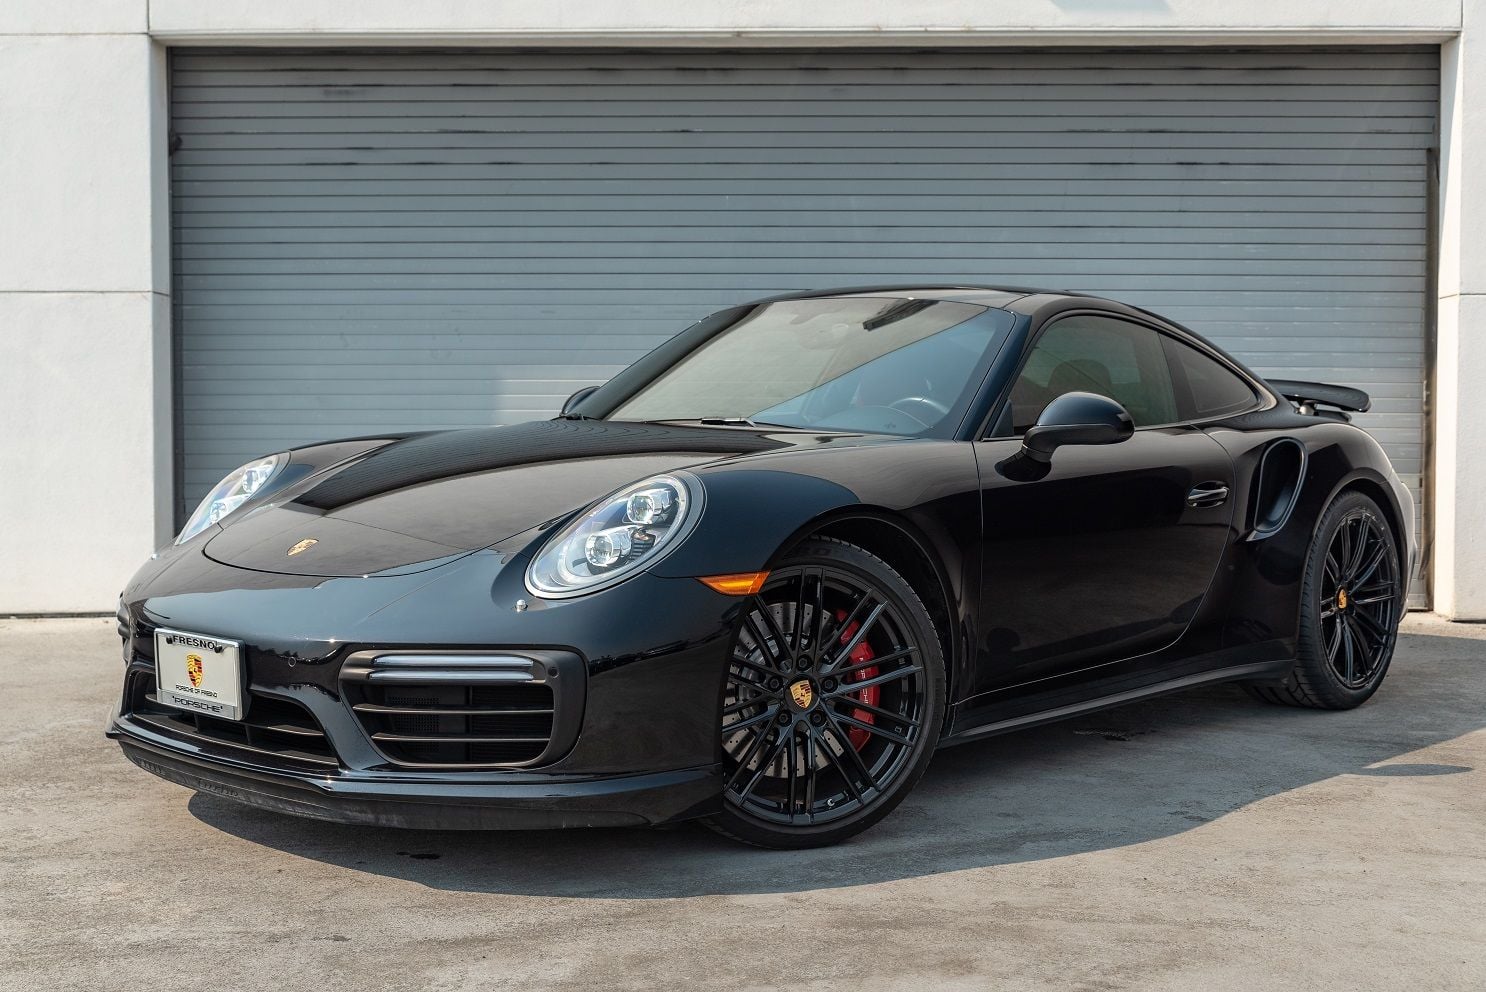 2017 Porsche 911 - Certified 2017 Porsche 911 Turbo Coupe - Used - VIN WP0AD2A9XHS166074 - 8,149 Miles - 6 cyl - AWD - Automatic - Coupe - Black - Fresno, CA 93650, United States